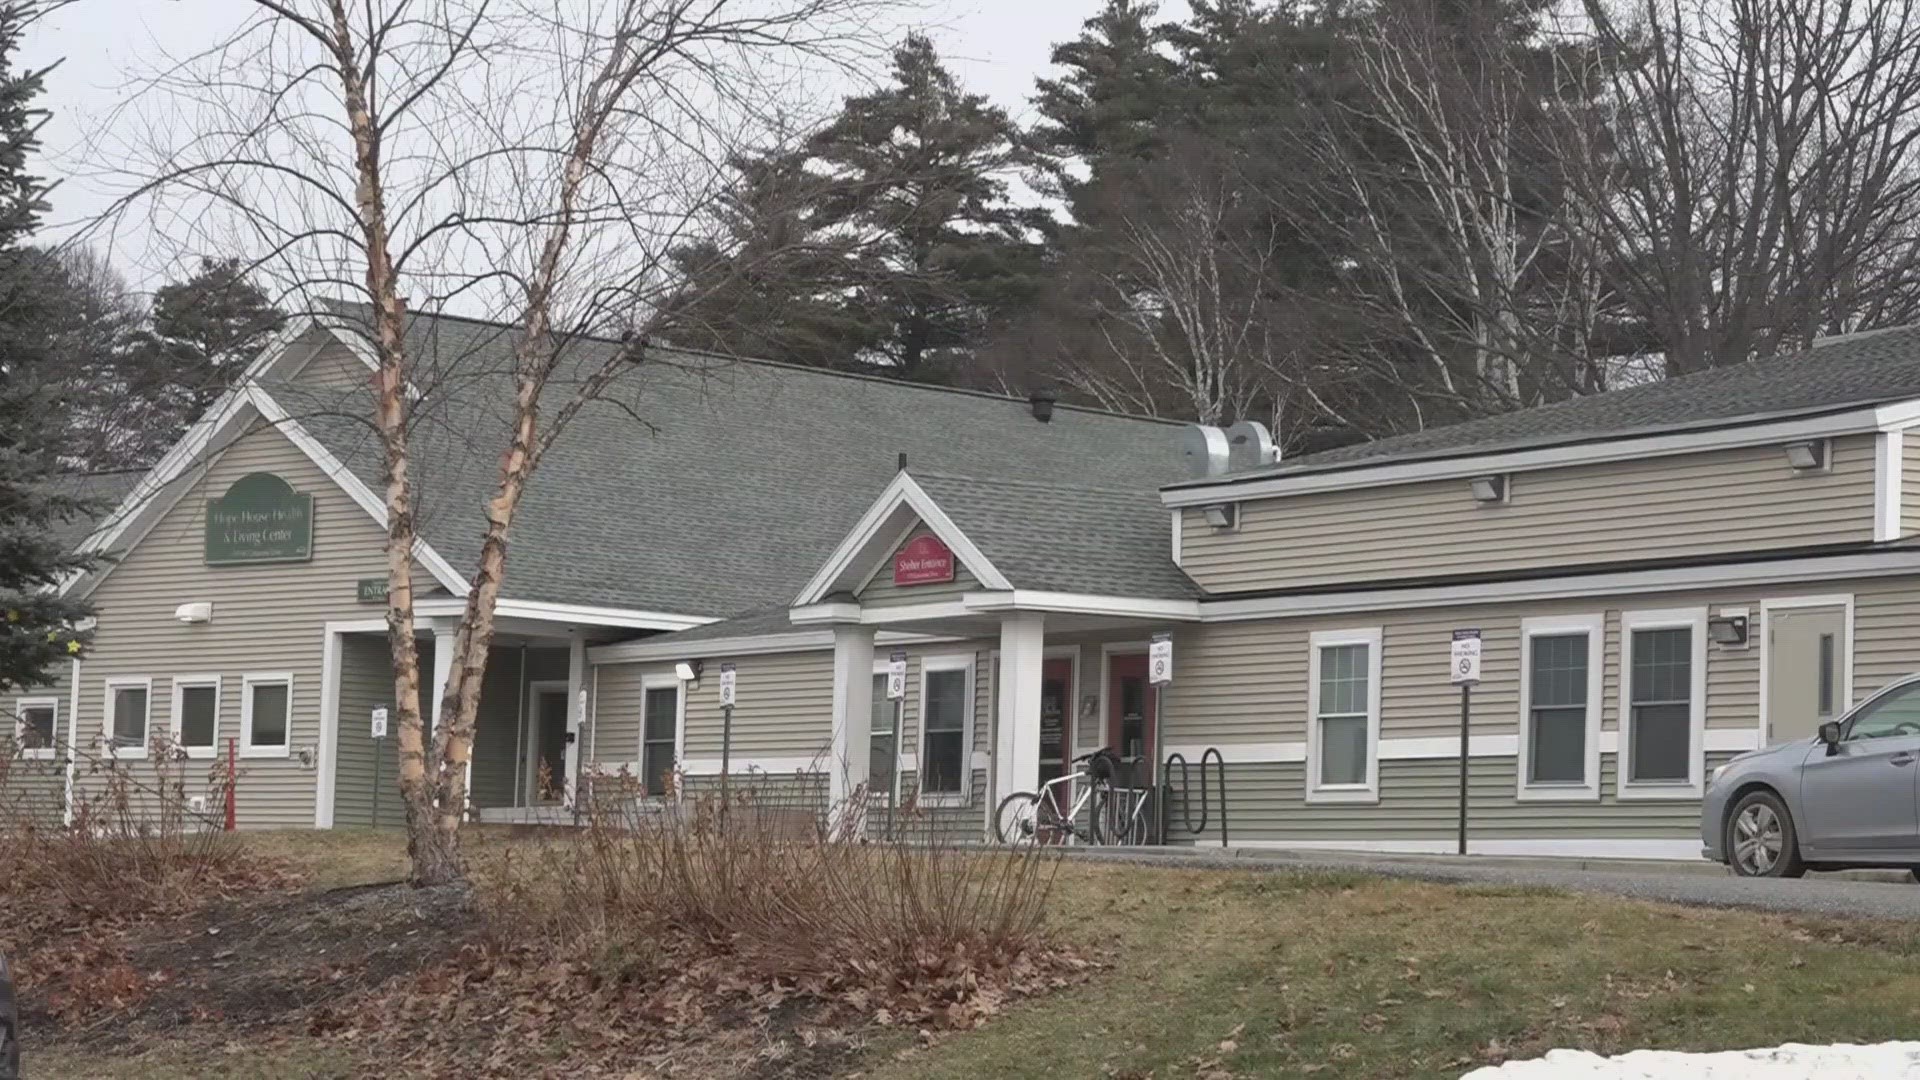 According to Bangor Area Homeless Shelter Director Boyd Kronholm, if the Hope House closes, shelters in the area likely won't be able to fill the gap.